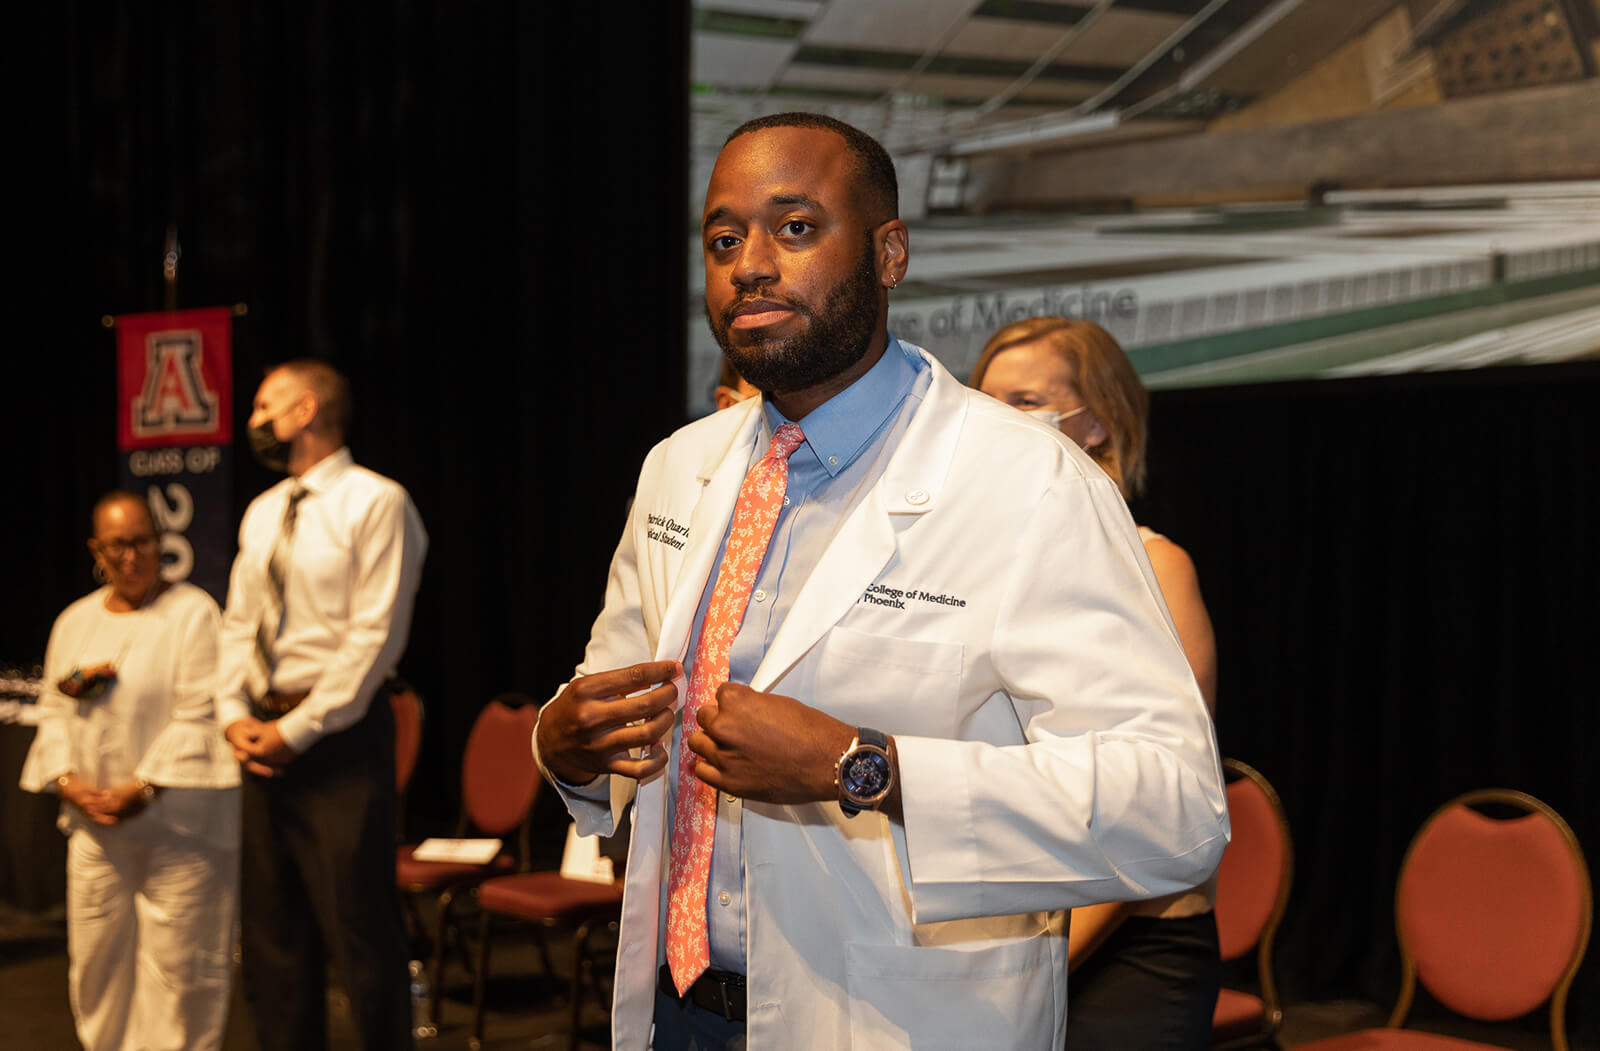 First-year medical student Patrick Quarles receives his white coat during the Class of 2026 White Coat Ceremony